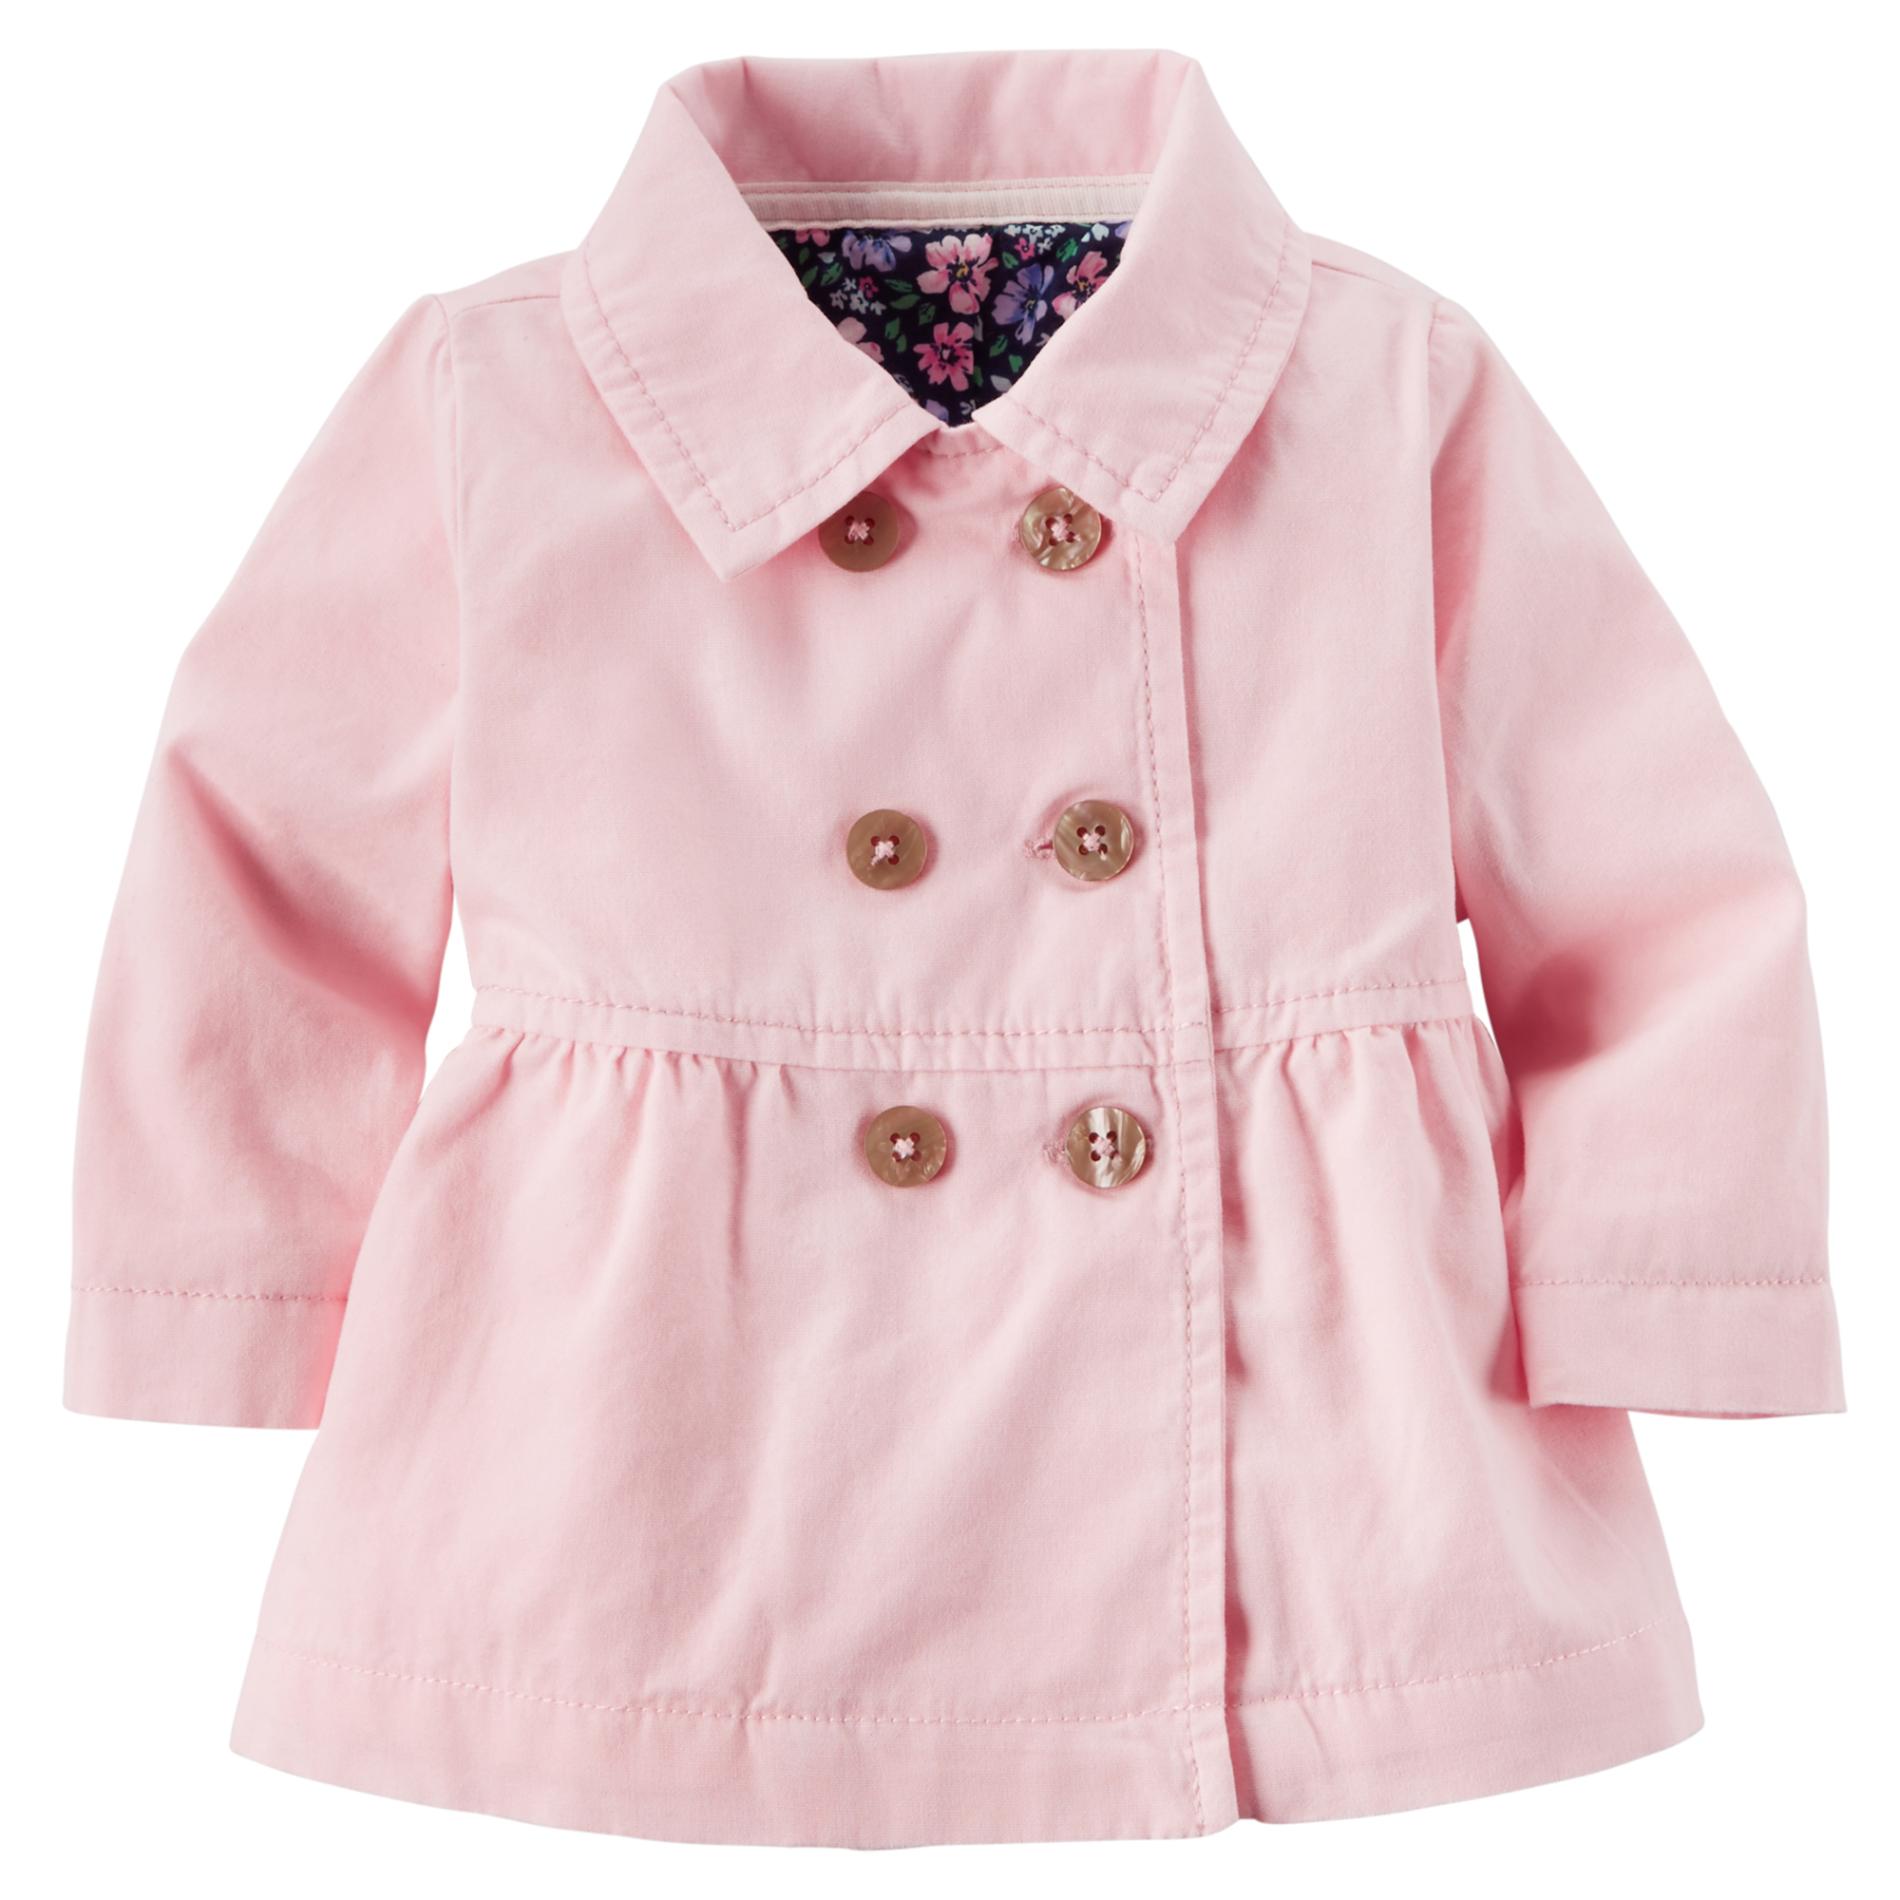 Carter's Newborn & Infant Girl's Double-Breasted Jacket